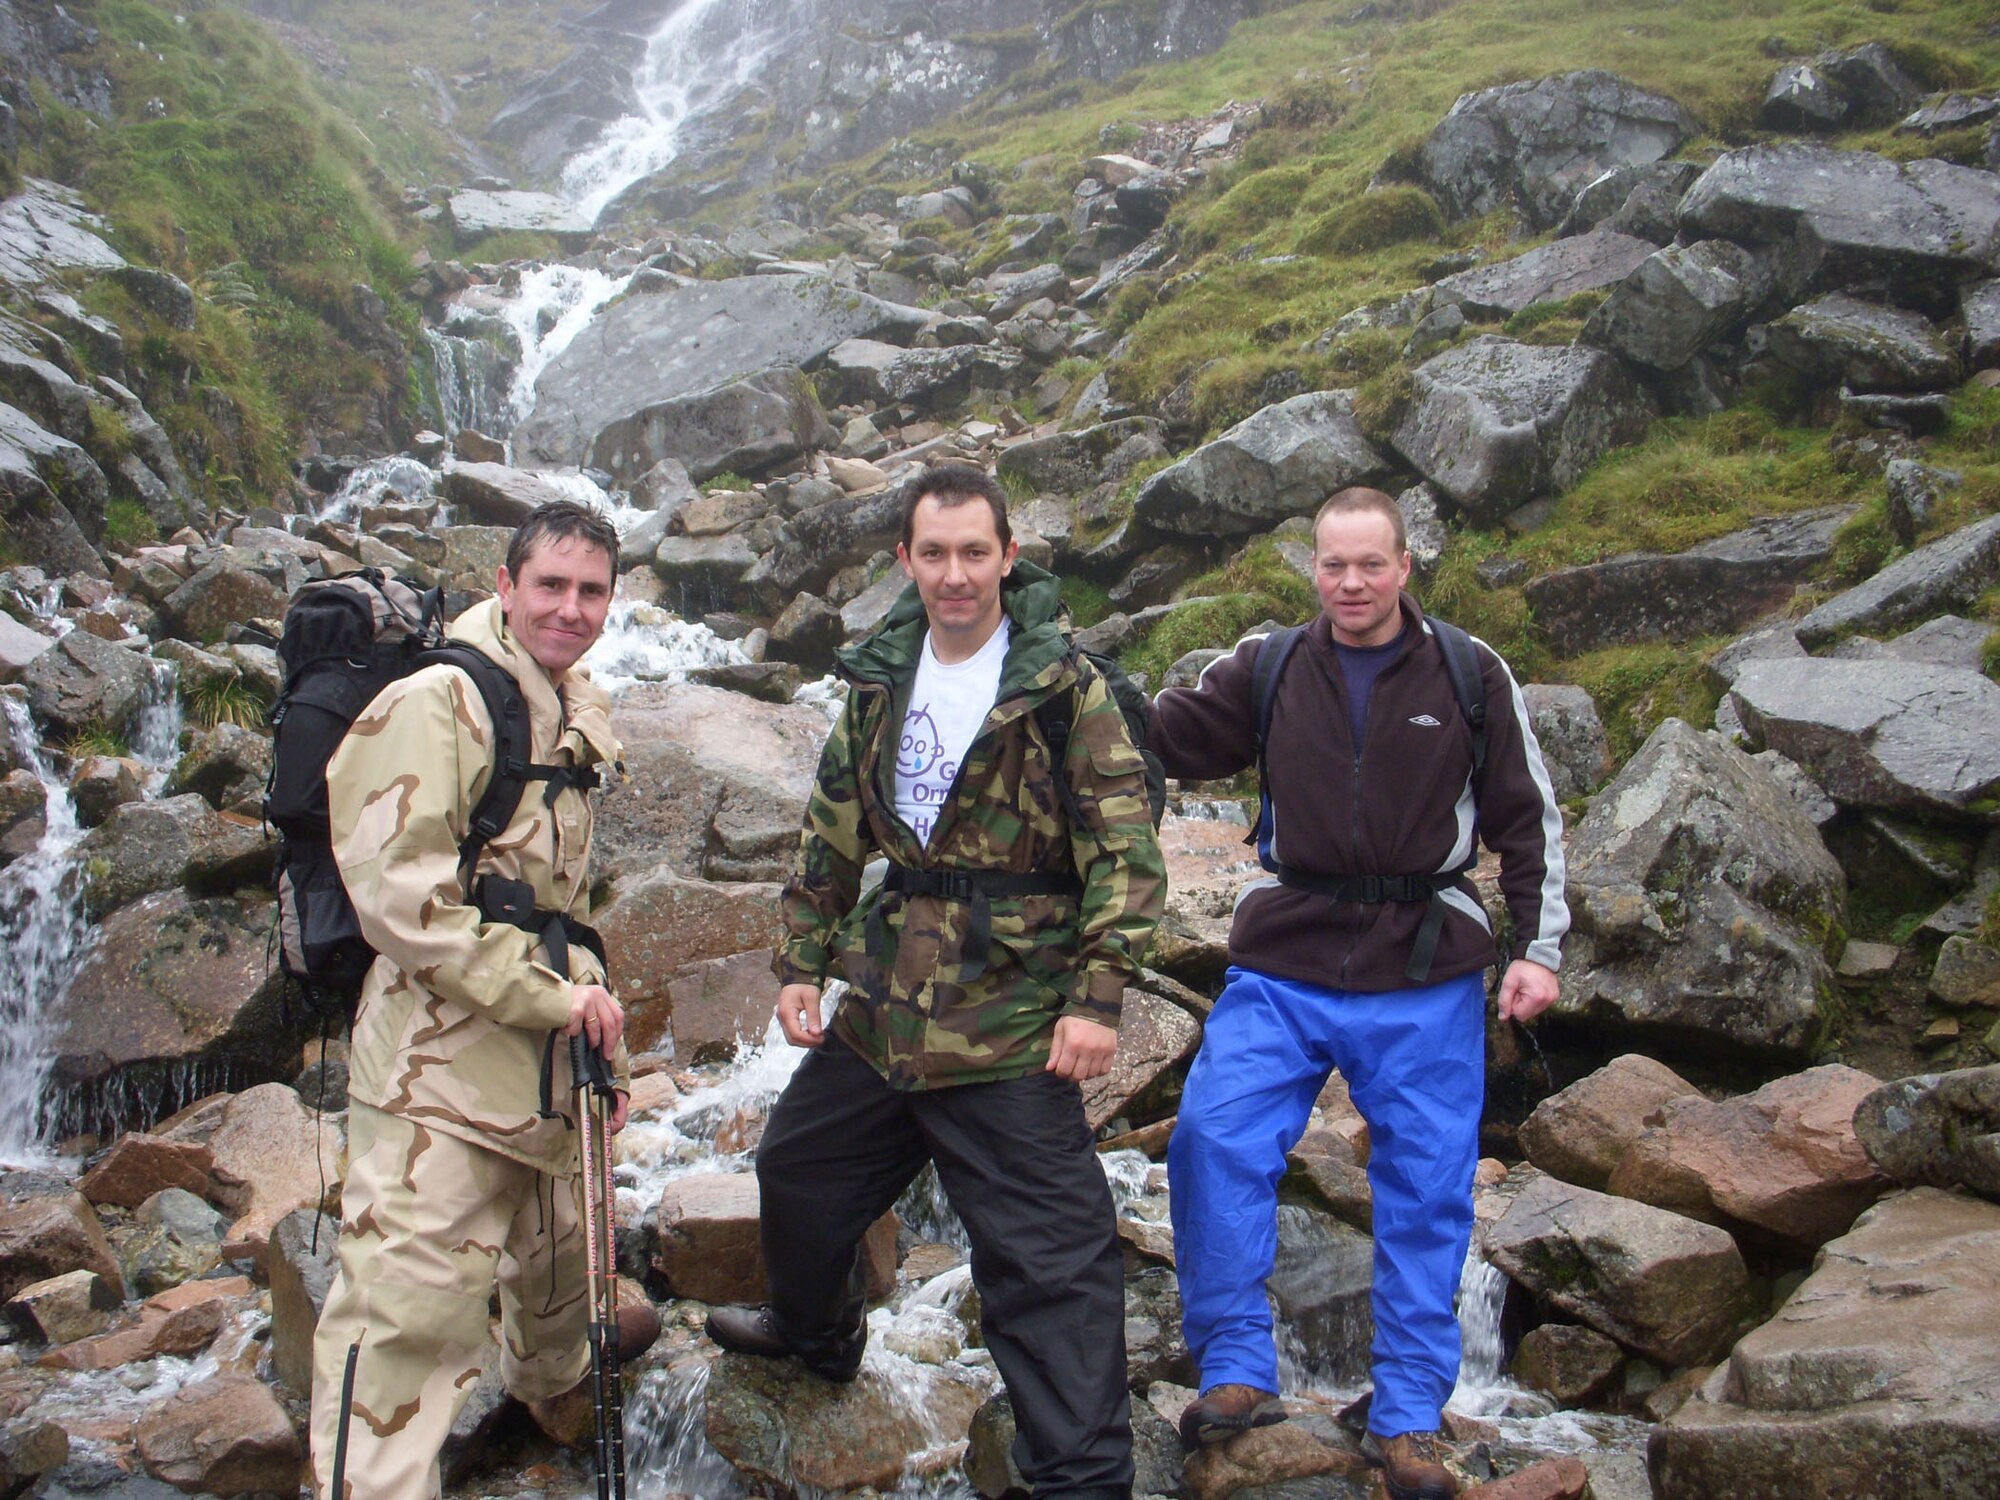 Defence Fire Service firefighters Chris Gould, Alan Coldwell and Jerry Myles, all 100th Civil Engineer Squadron Fire Department, pose for a photo after climbing Ben Nevis, Scotland on the first leg of their Three Peaks Challenge. They also climbed Scaffel Pike, England, and Mount Snowdon, Wales, where they took part in rescue efforts to save a man who was suffering from hypothermia and frostbite. (Courtesy photo)